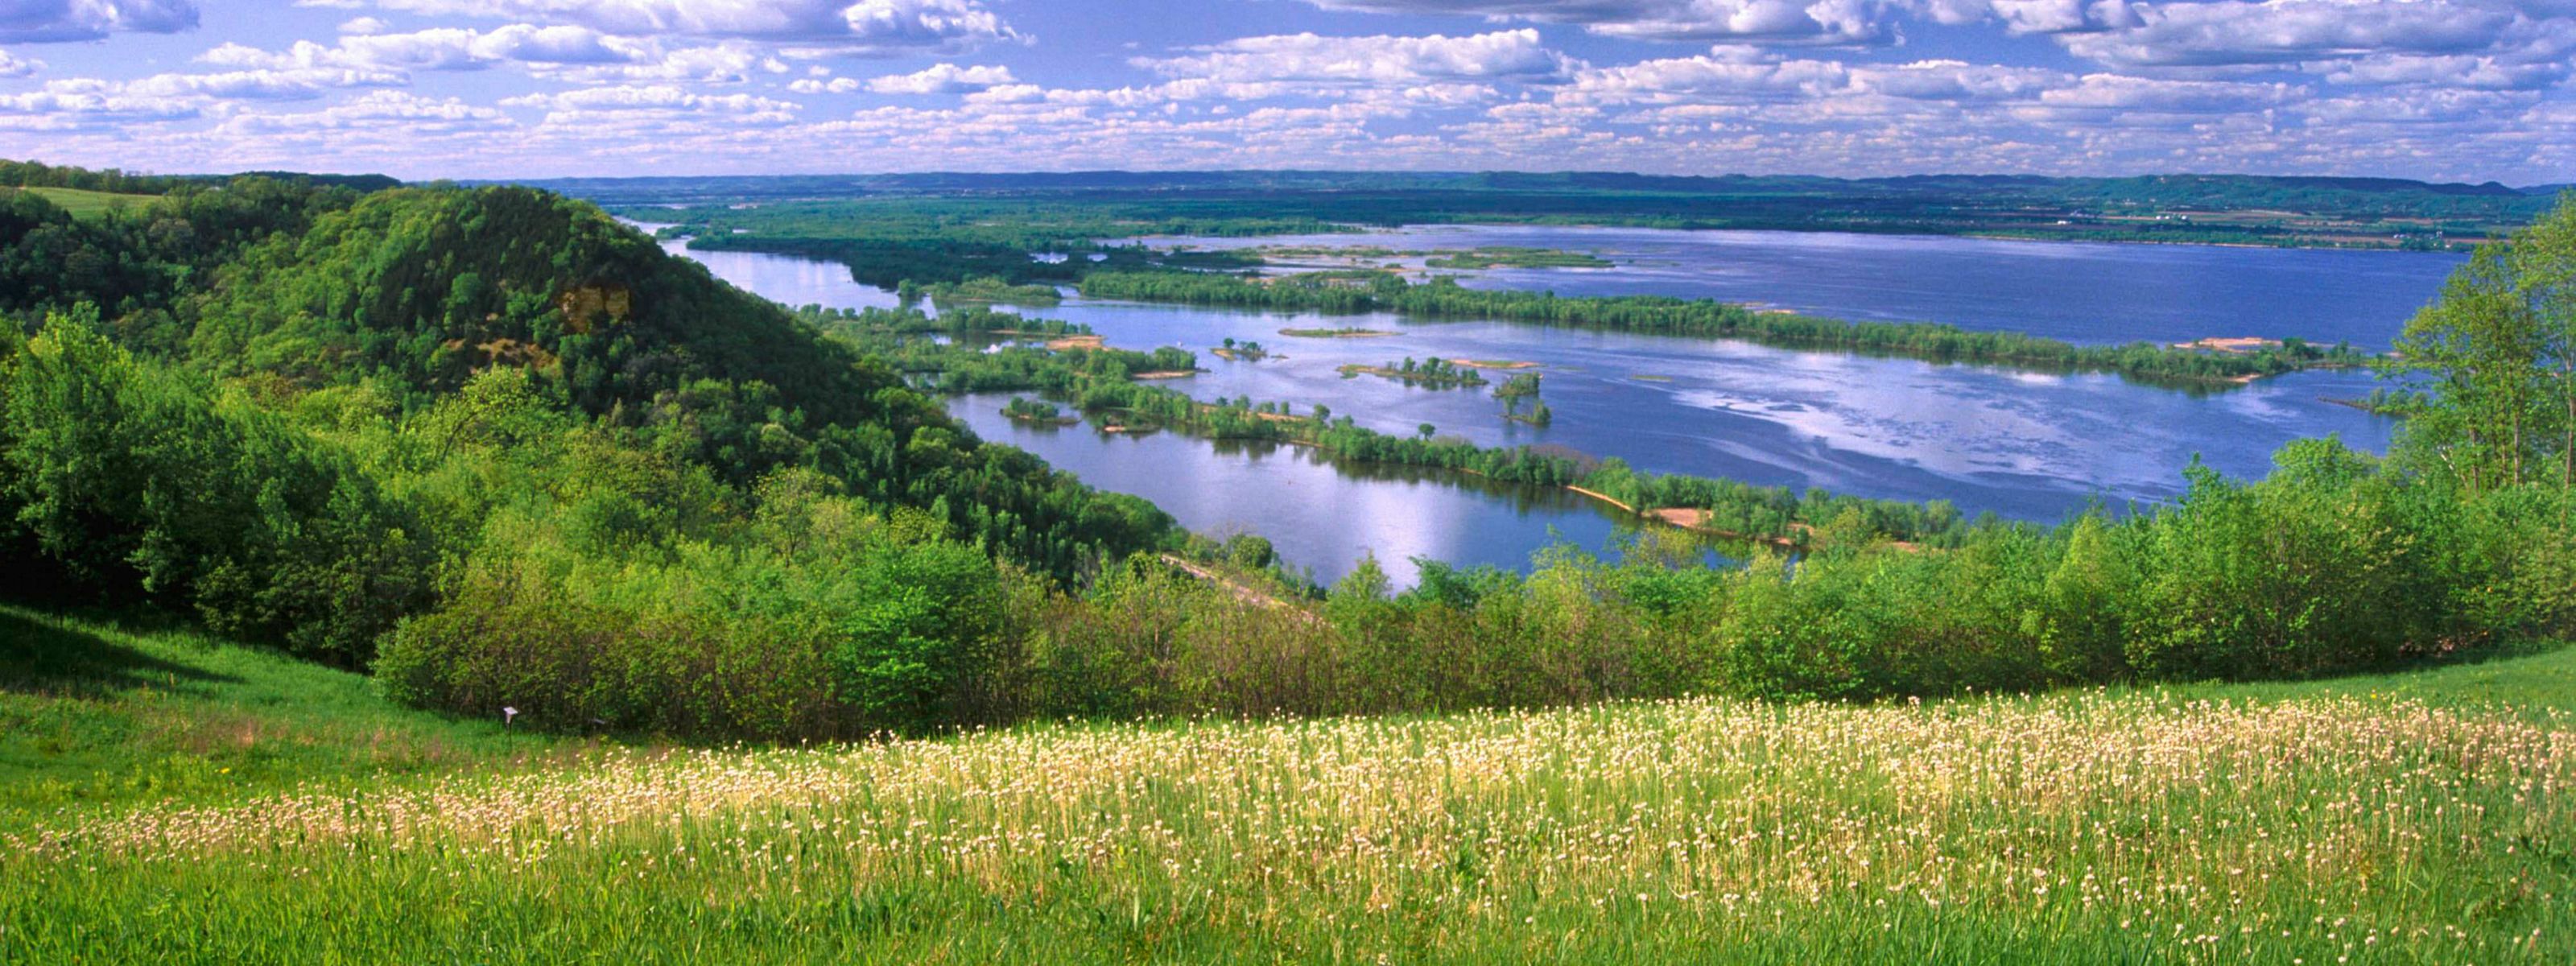 View of the Mississippi River from a field in Onalaska, Wisconsin